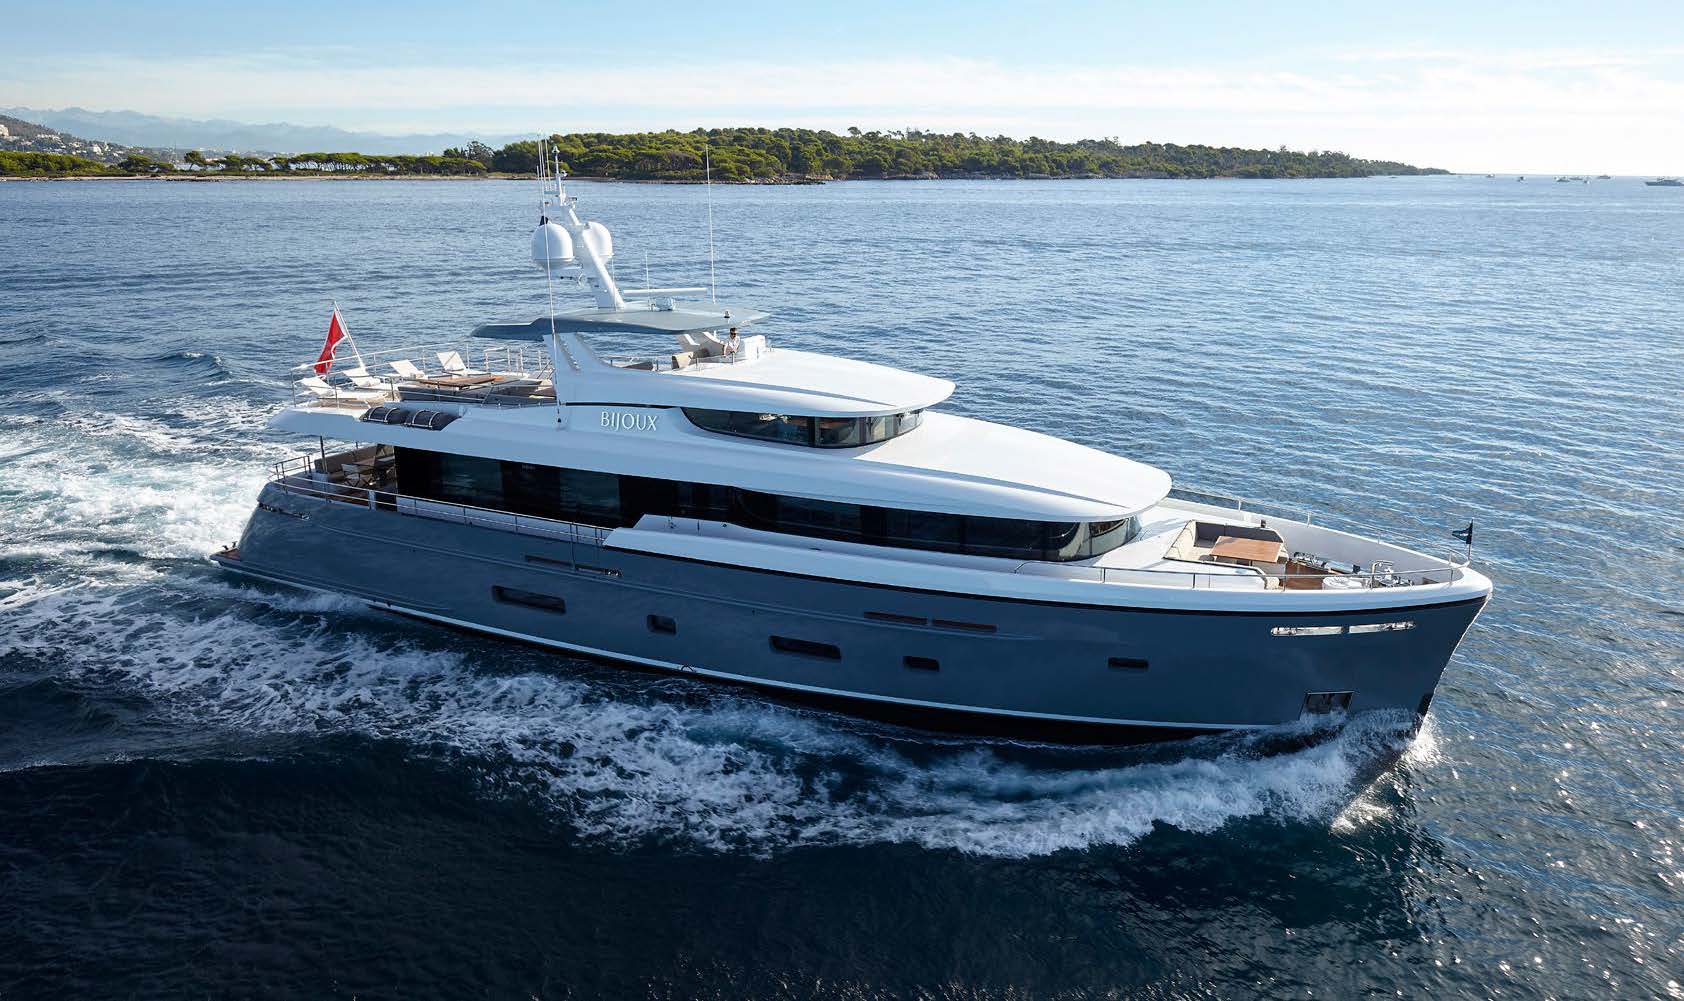 BIJOUX II specs with detailed specification and builder summary